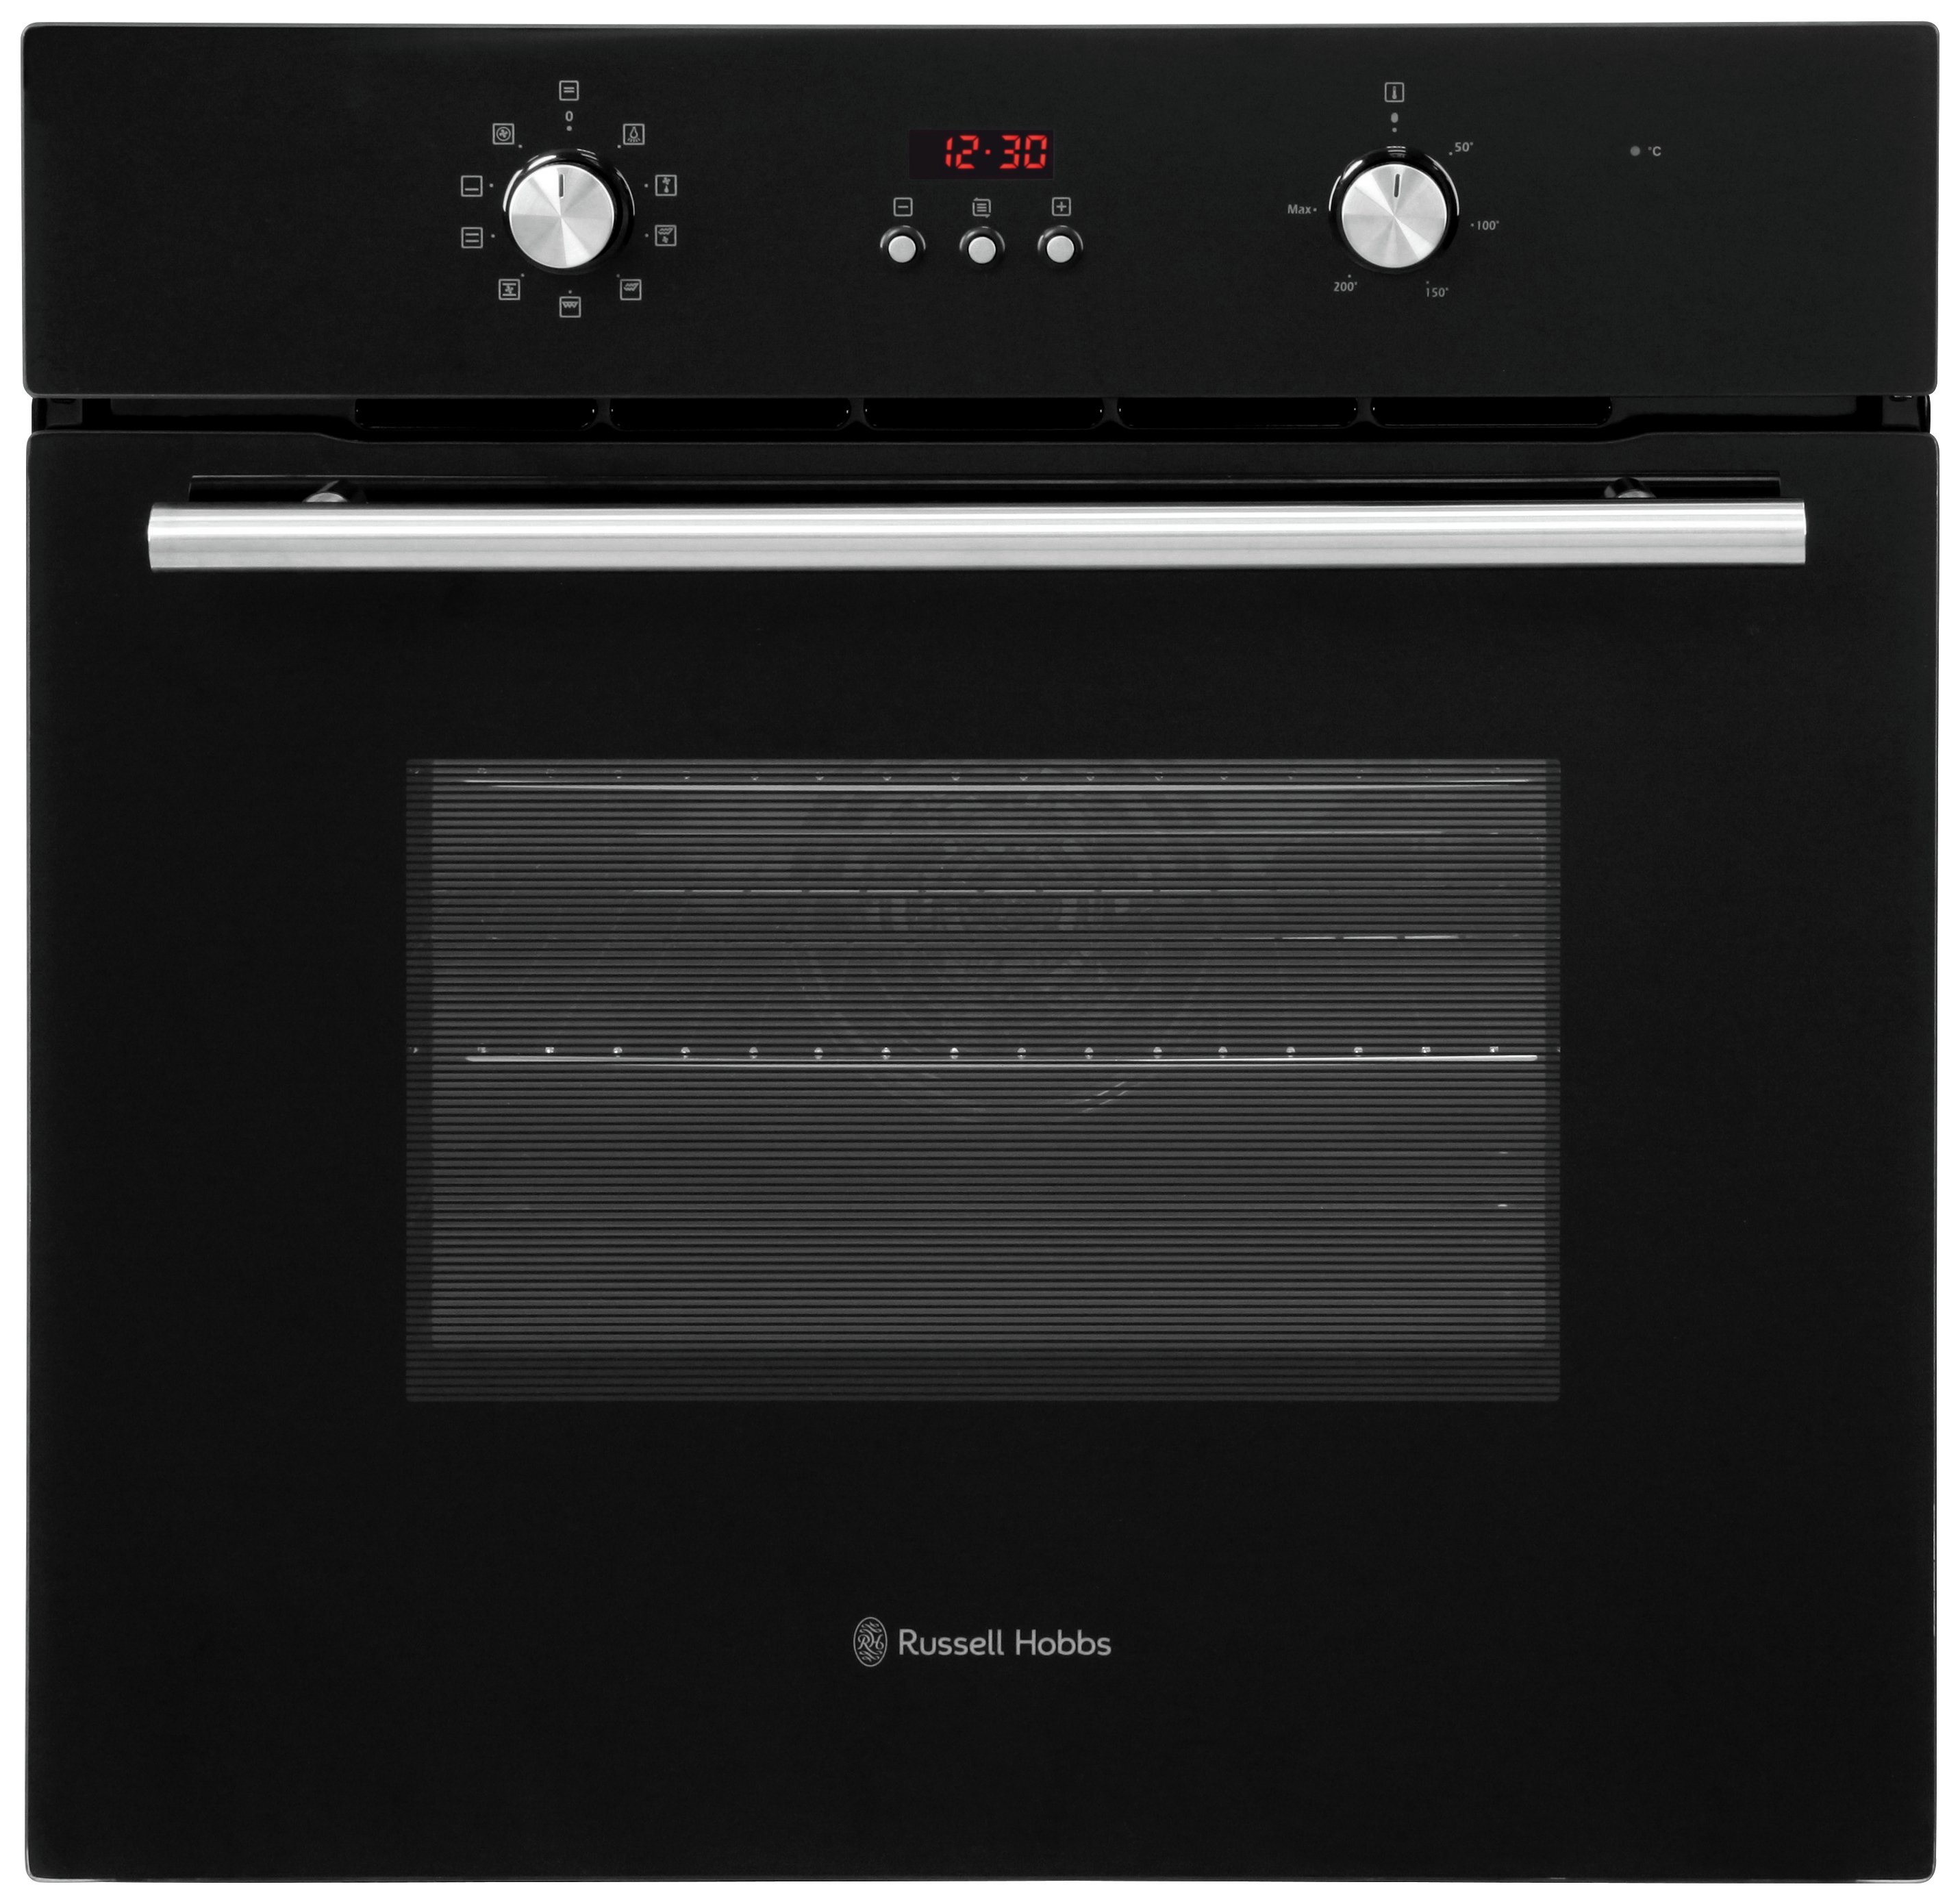 Russell Hobbs RHEO6501B Electric Oven review